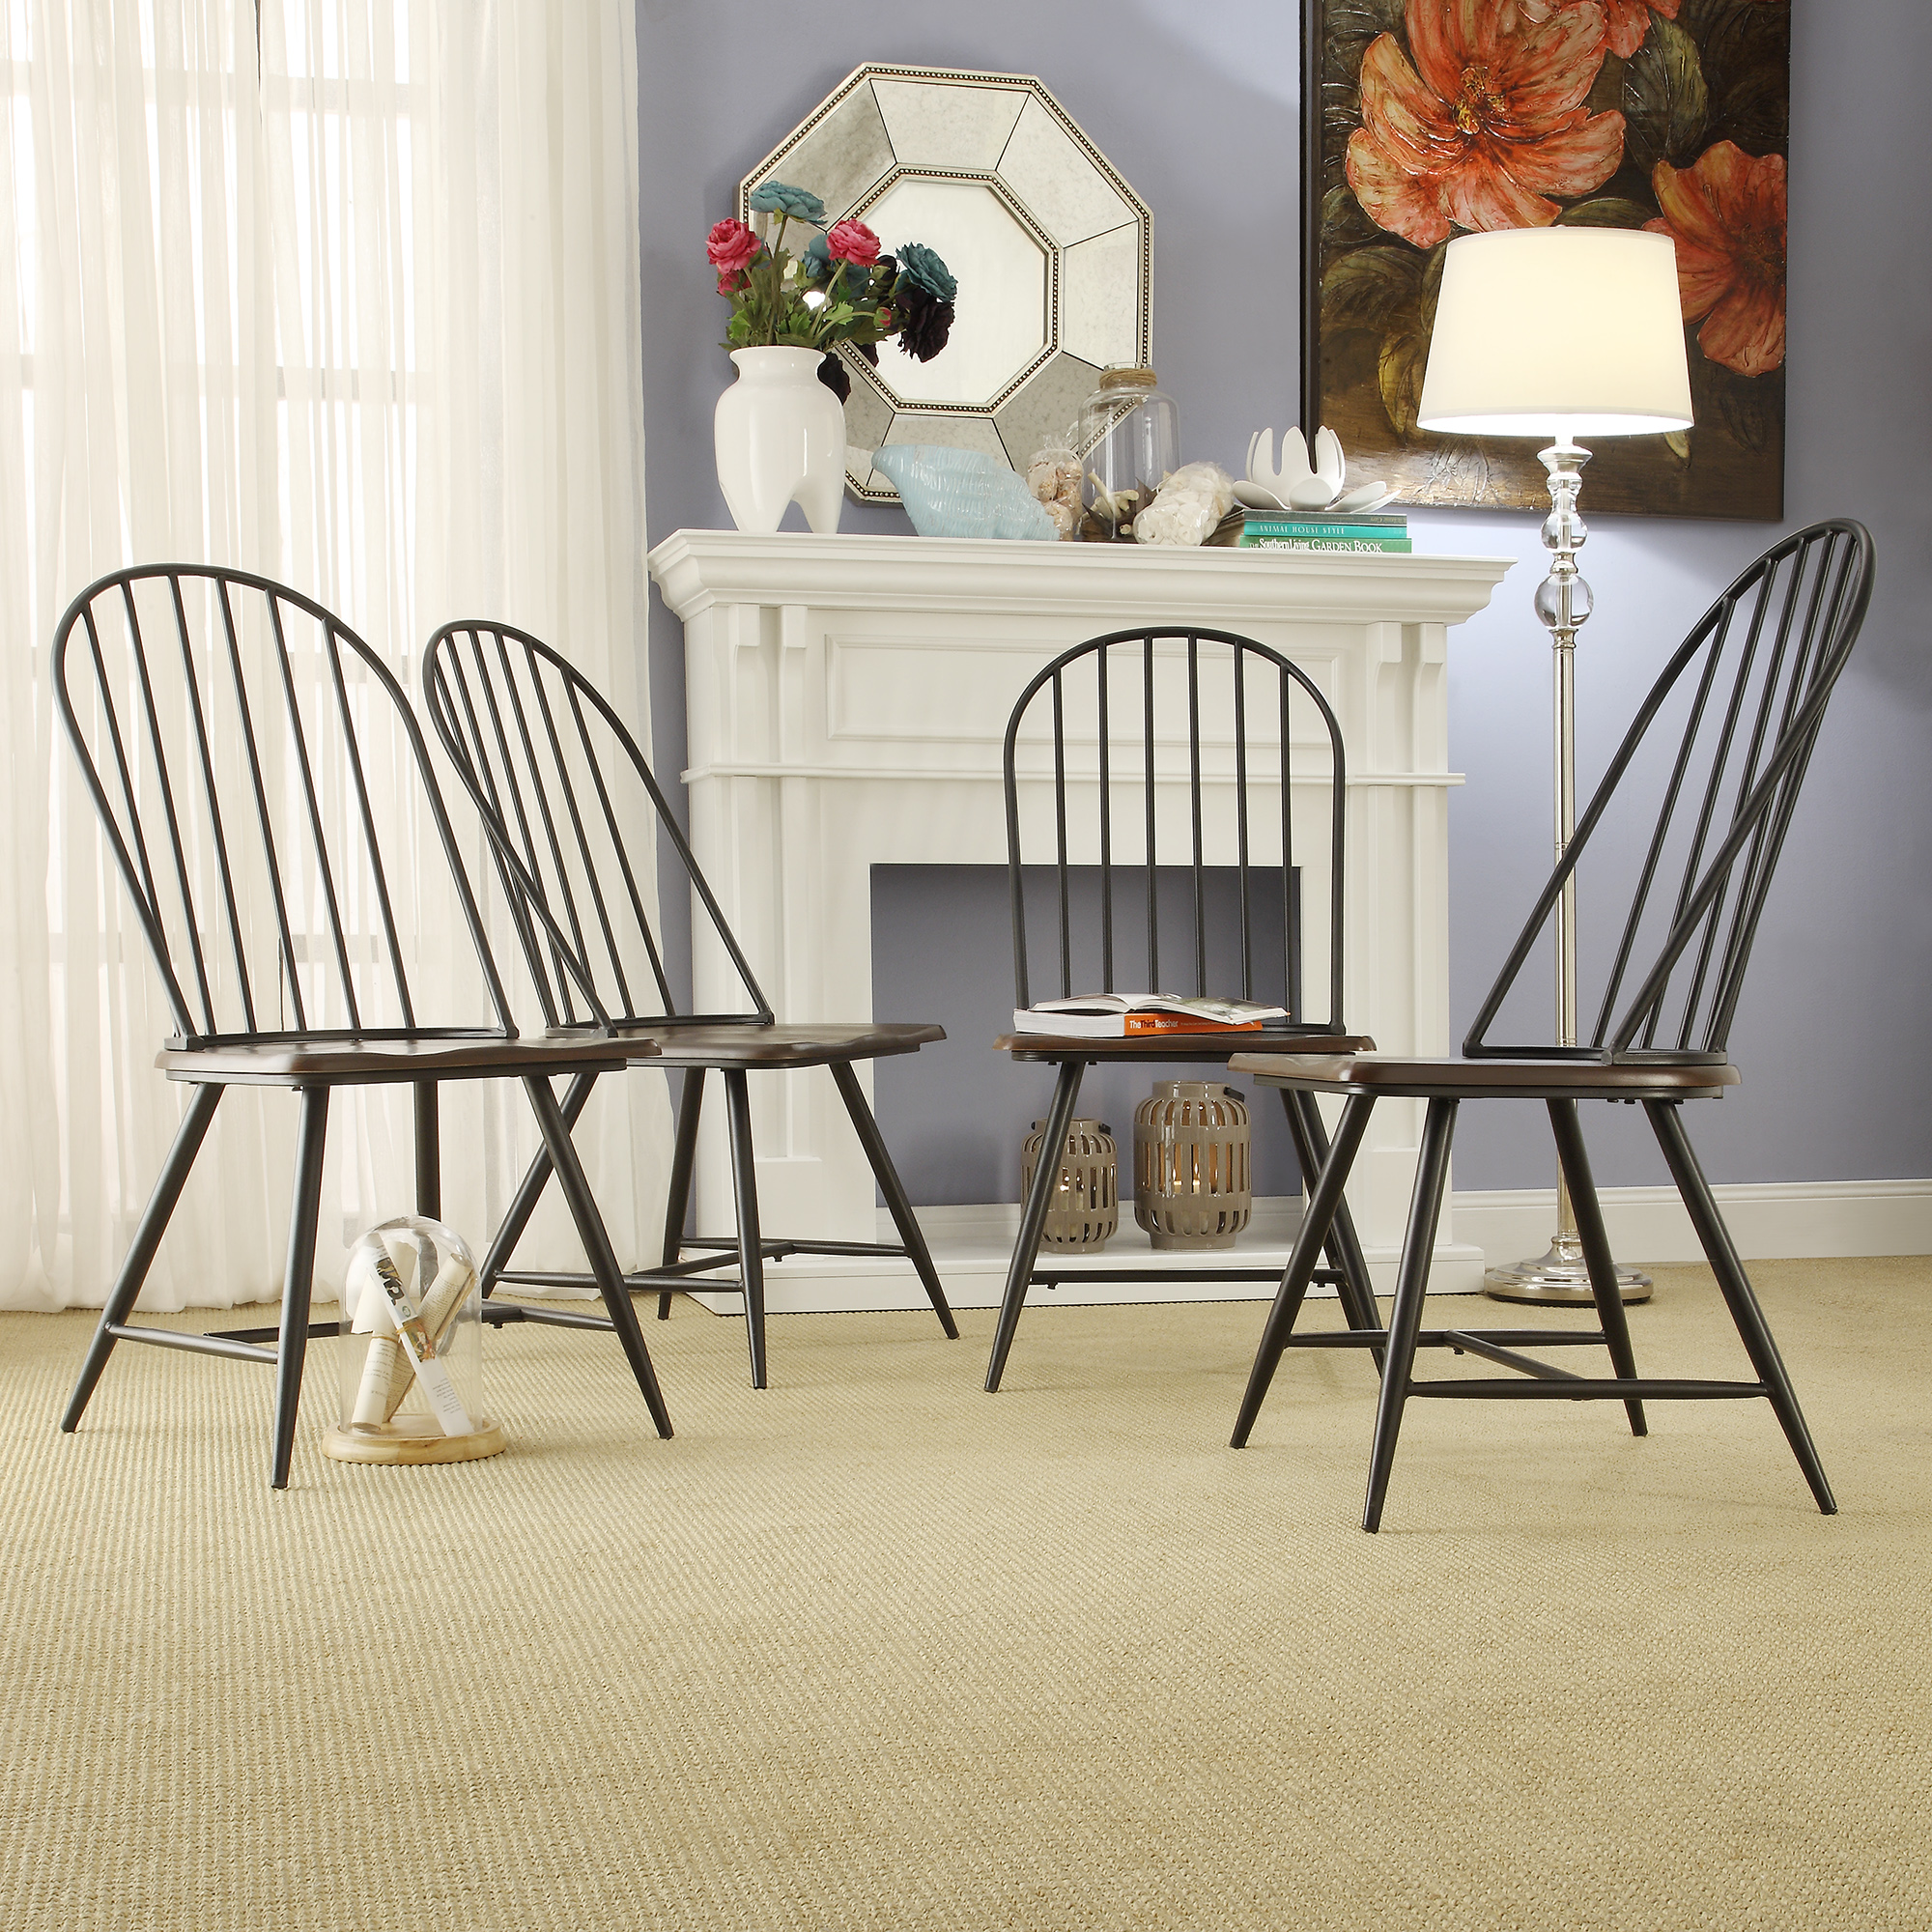 Two-Tone Spindle Windsor Dining Chairs (Set of 4)